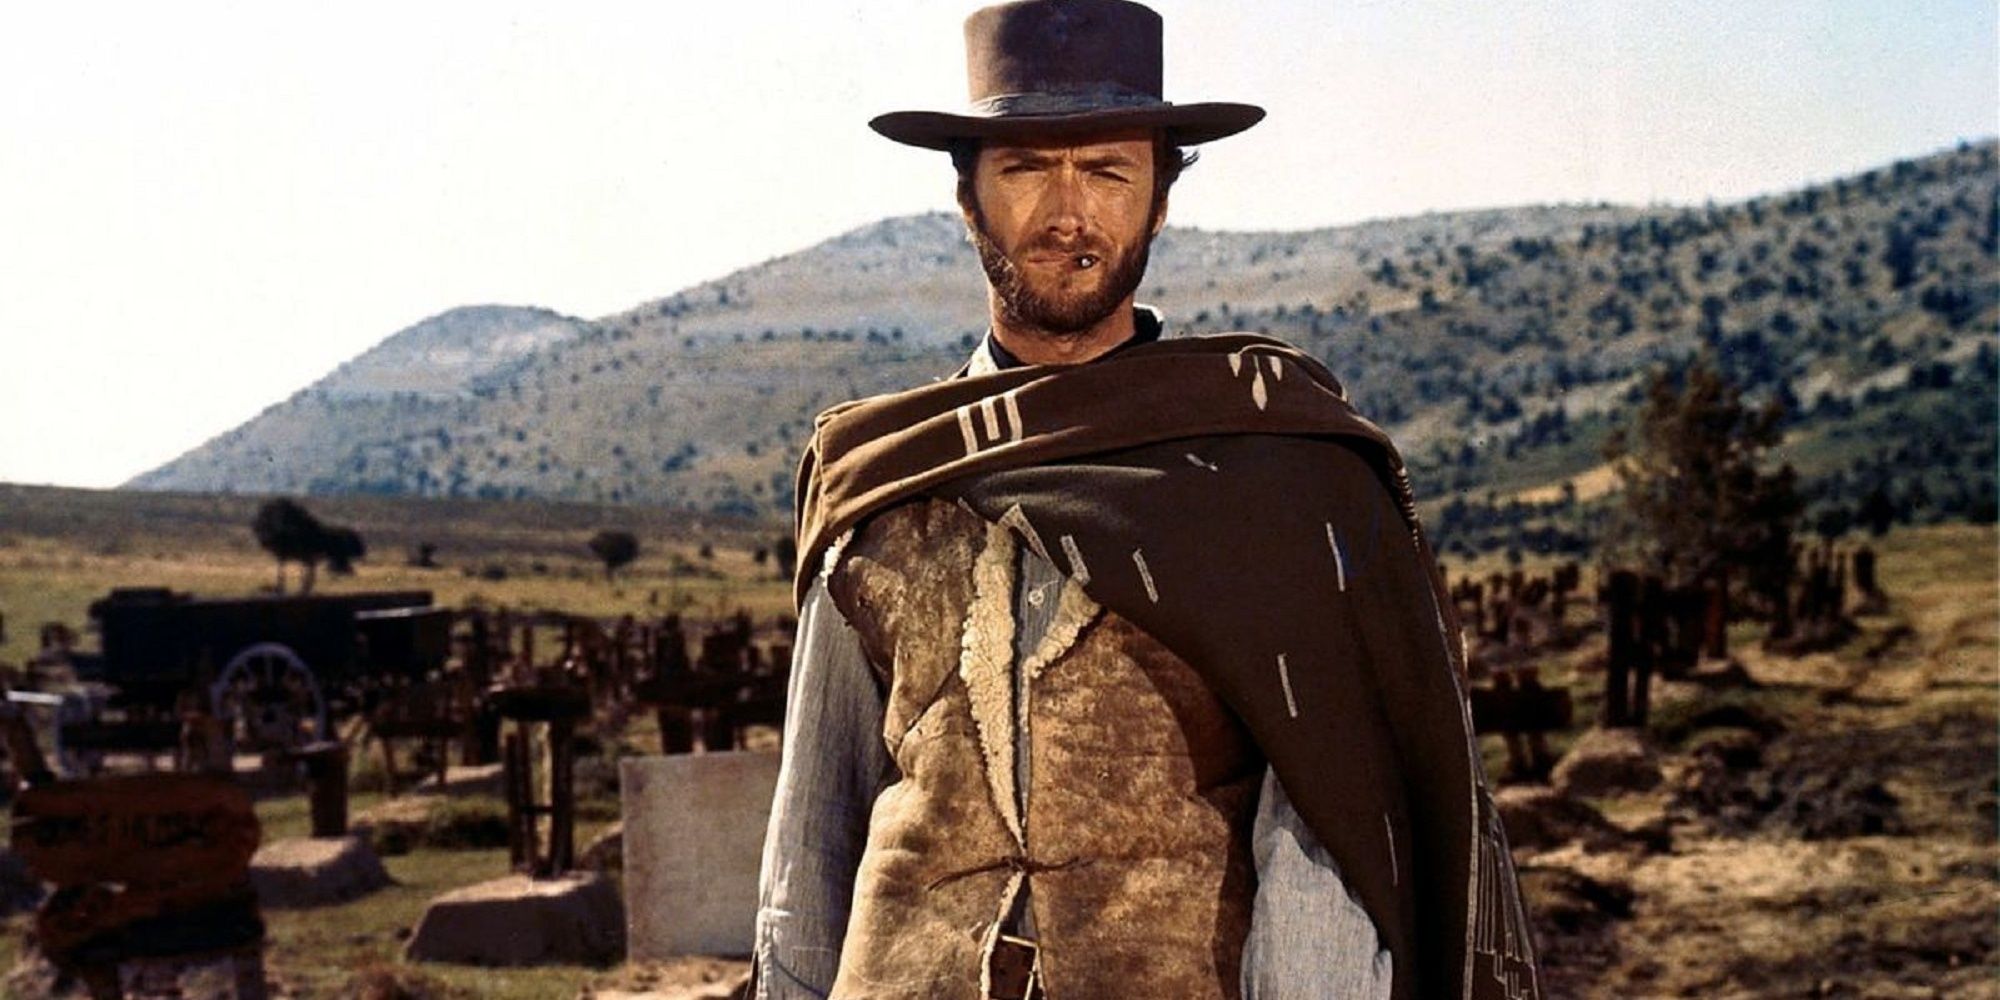 The Man with No Name standing in the desert in 'The Good, the Bad and the Ugly.'